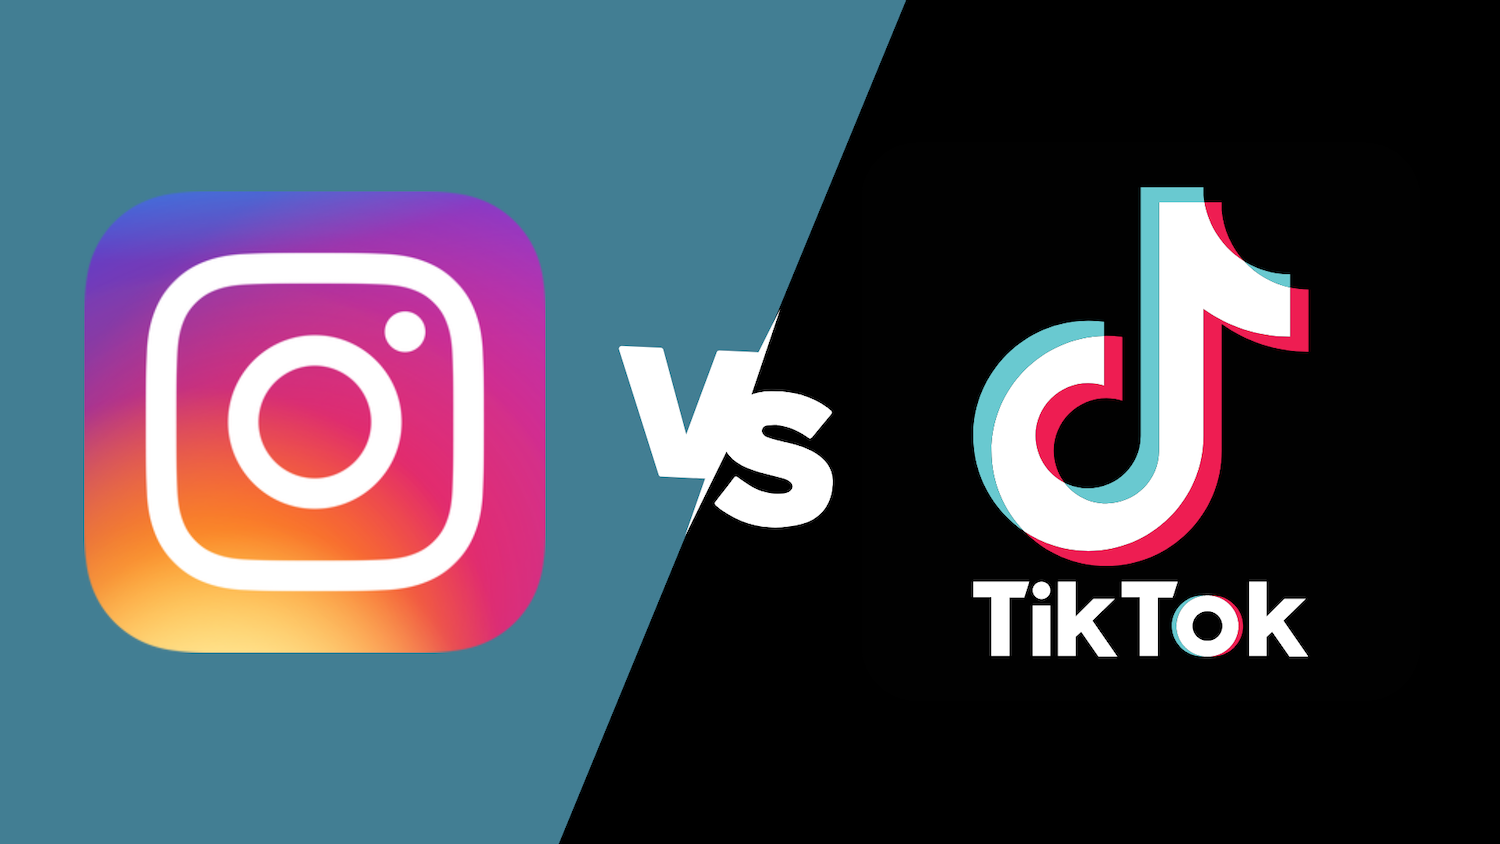 What Does a W' Comment Mean on TikTok? We Have the Answers You Need